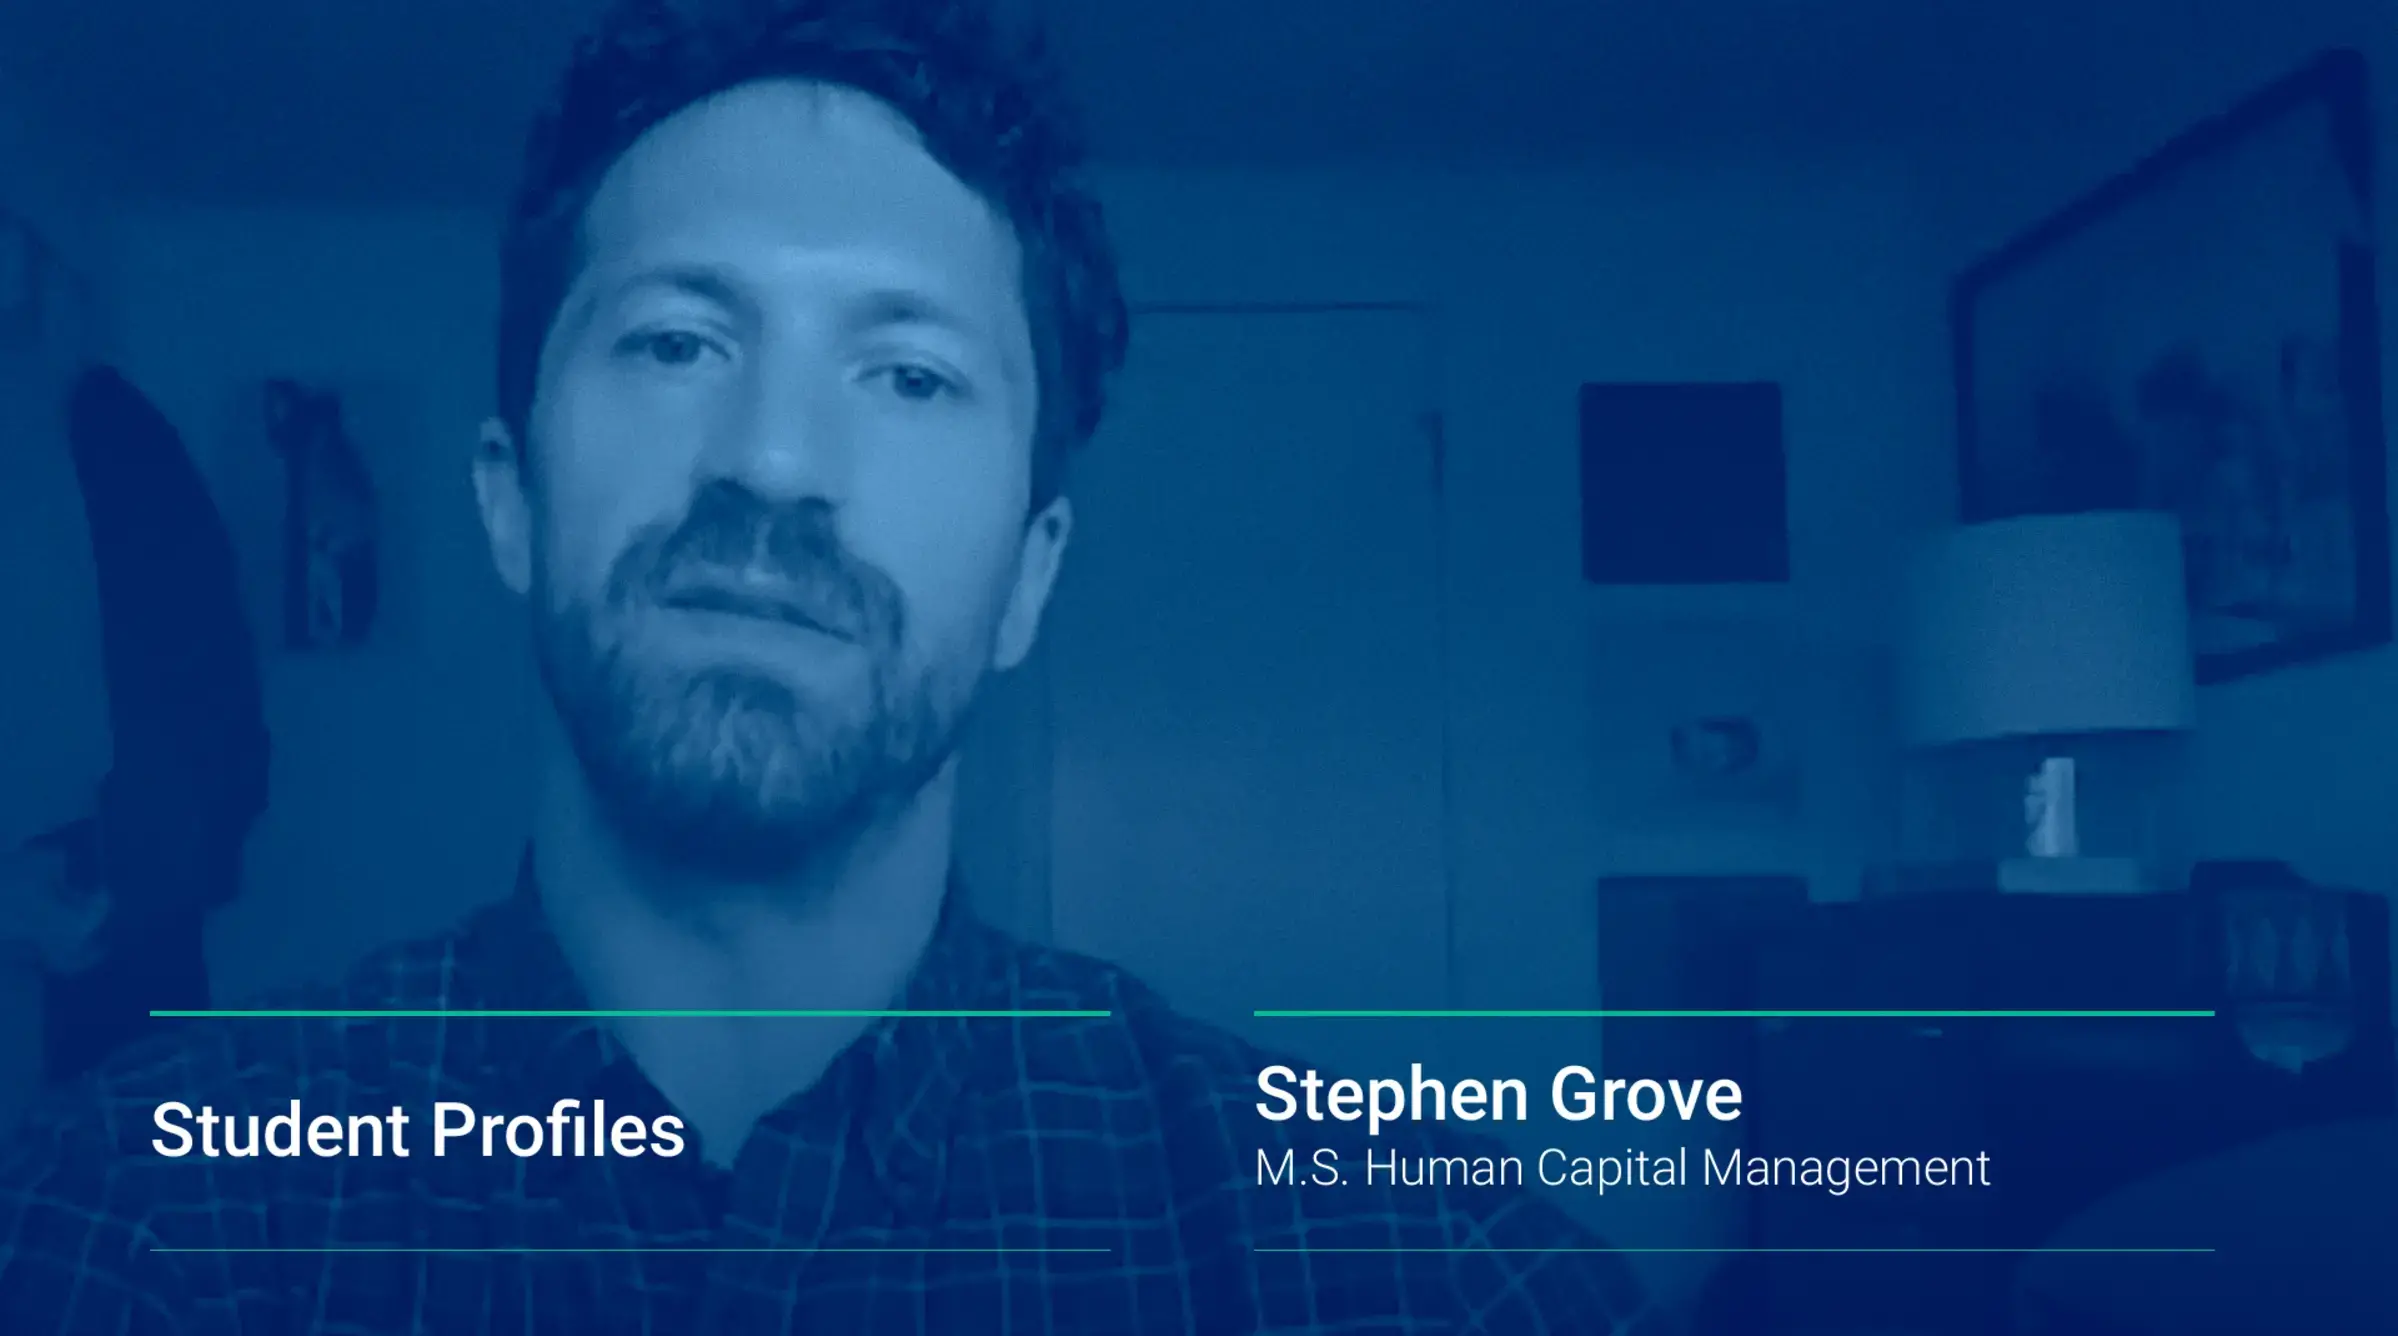 An image shows a still from Stephen Grove's video interview about the Human Capital Management master's program.